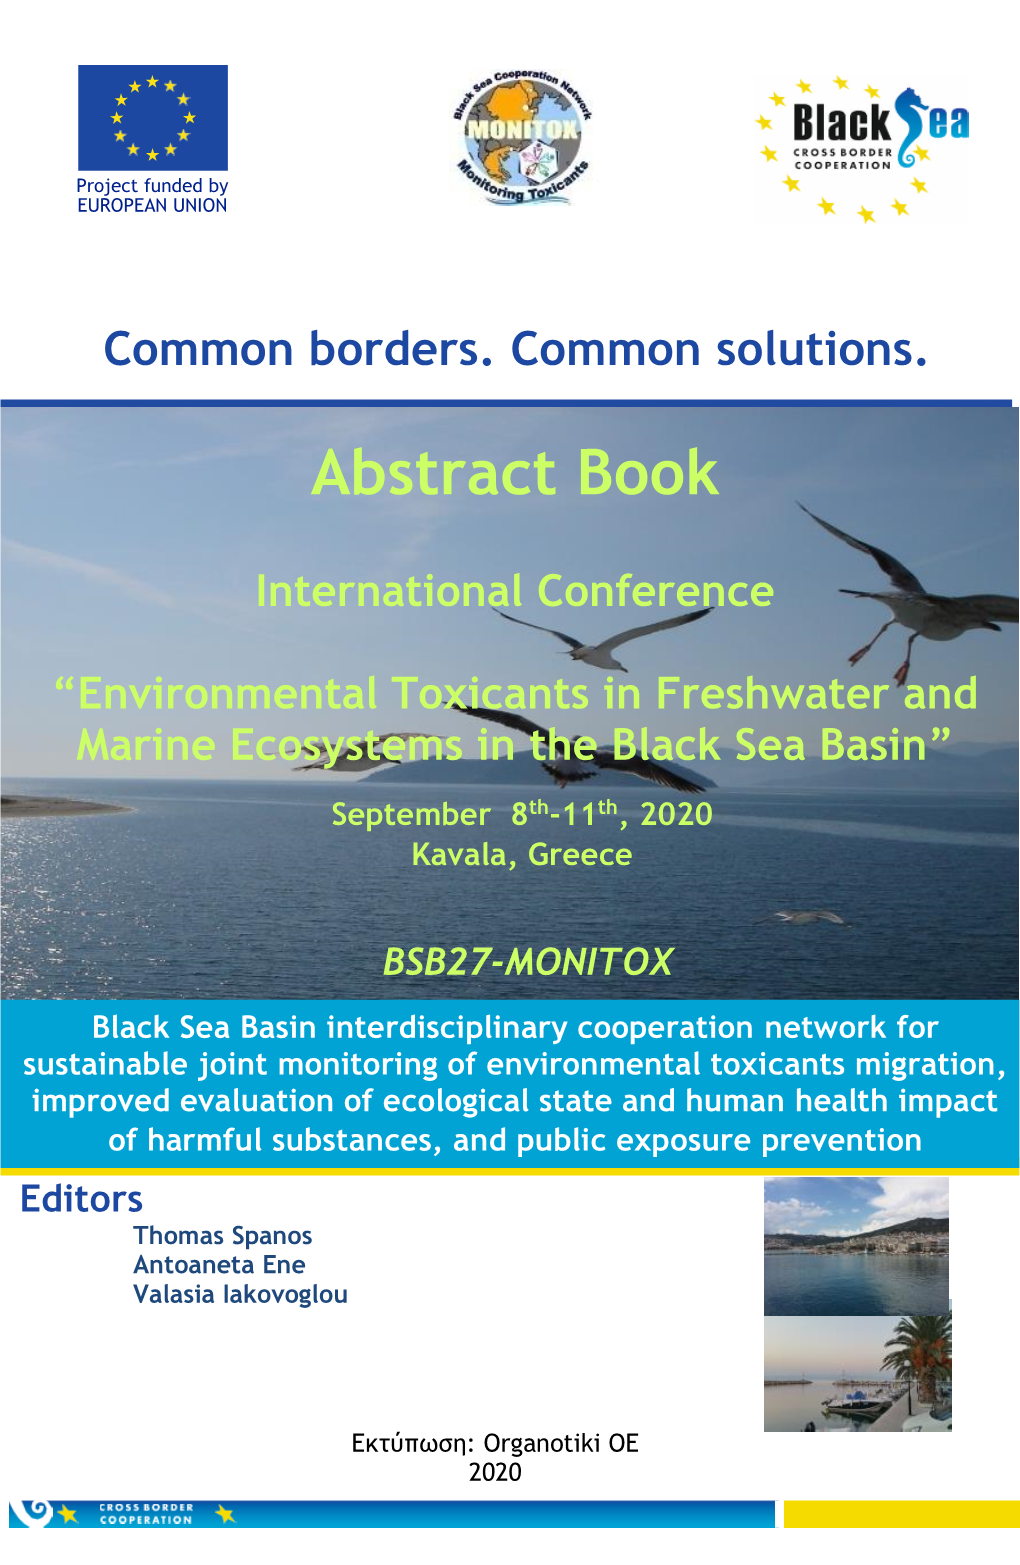 Abstract Book Conference Kavala